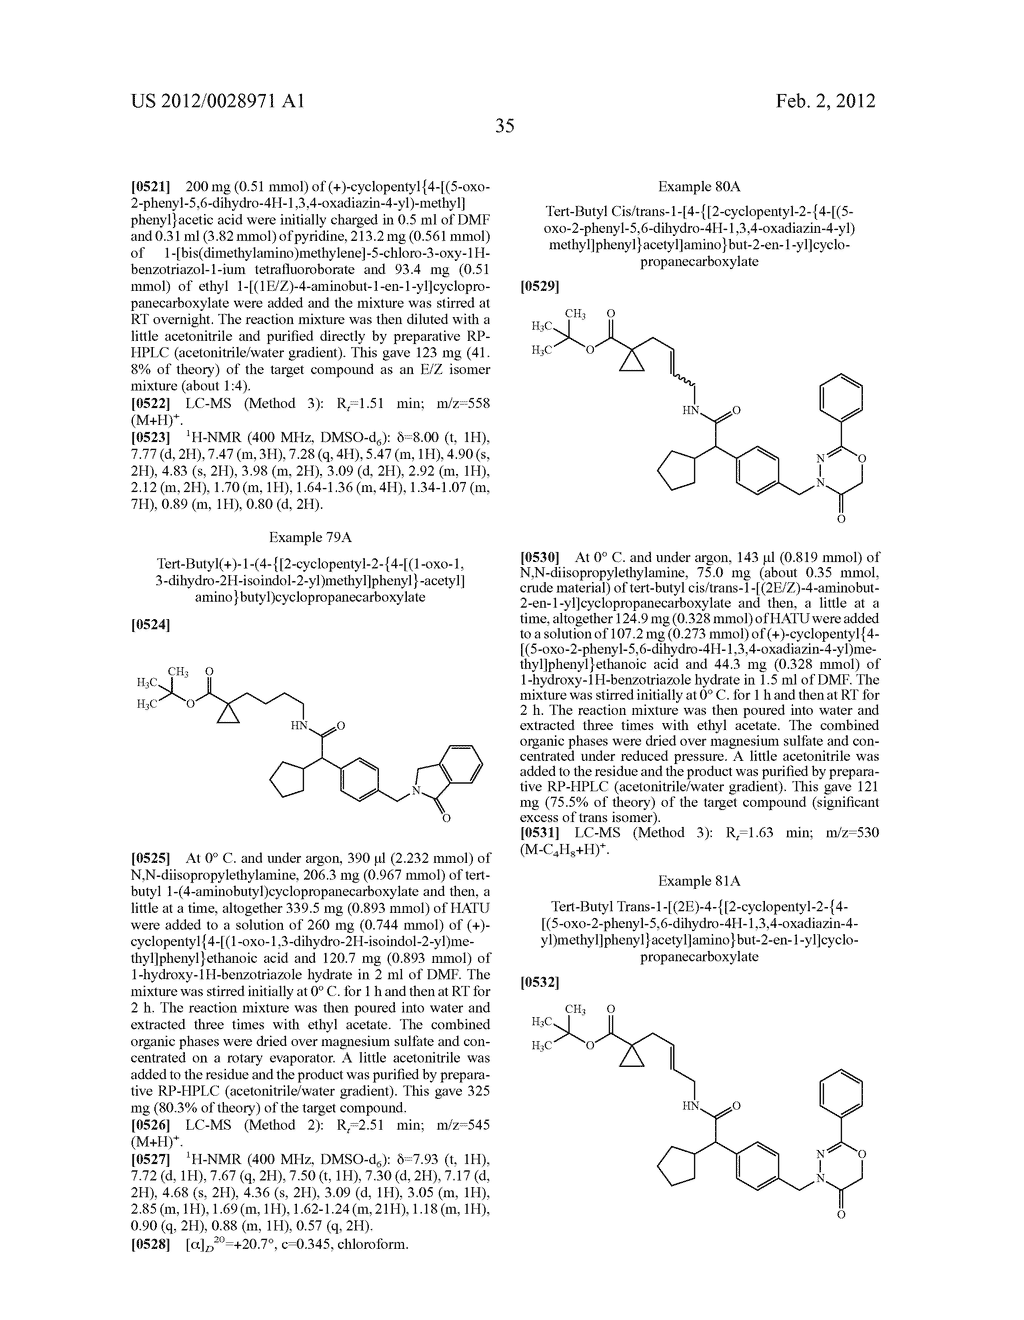 OXO-HETEROCYCLICALLY SUBSTITUTED ALKYL CARBOXYLIC ACIDS AND USE THEREOF - diagram, schematic, and image 36